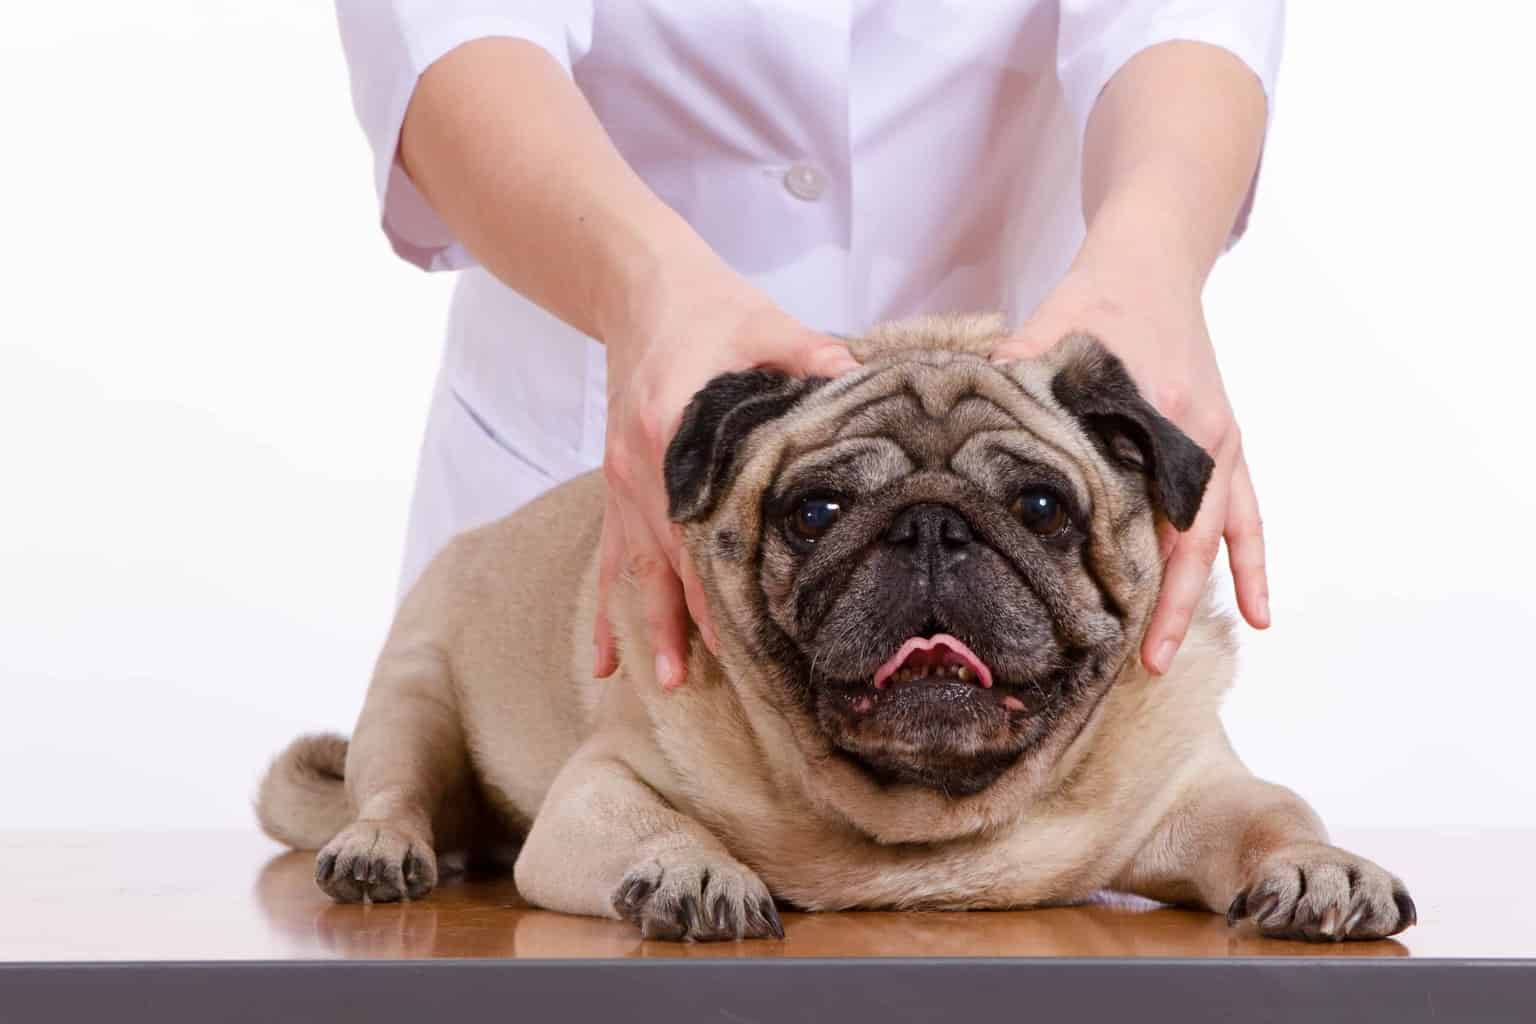 Pug gets massage. Pulsed electromagnetic field therapy treats wounds, bone injuries, arthritis, inflammation, and discomfort in dogs.